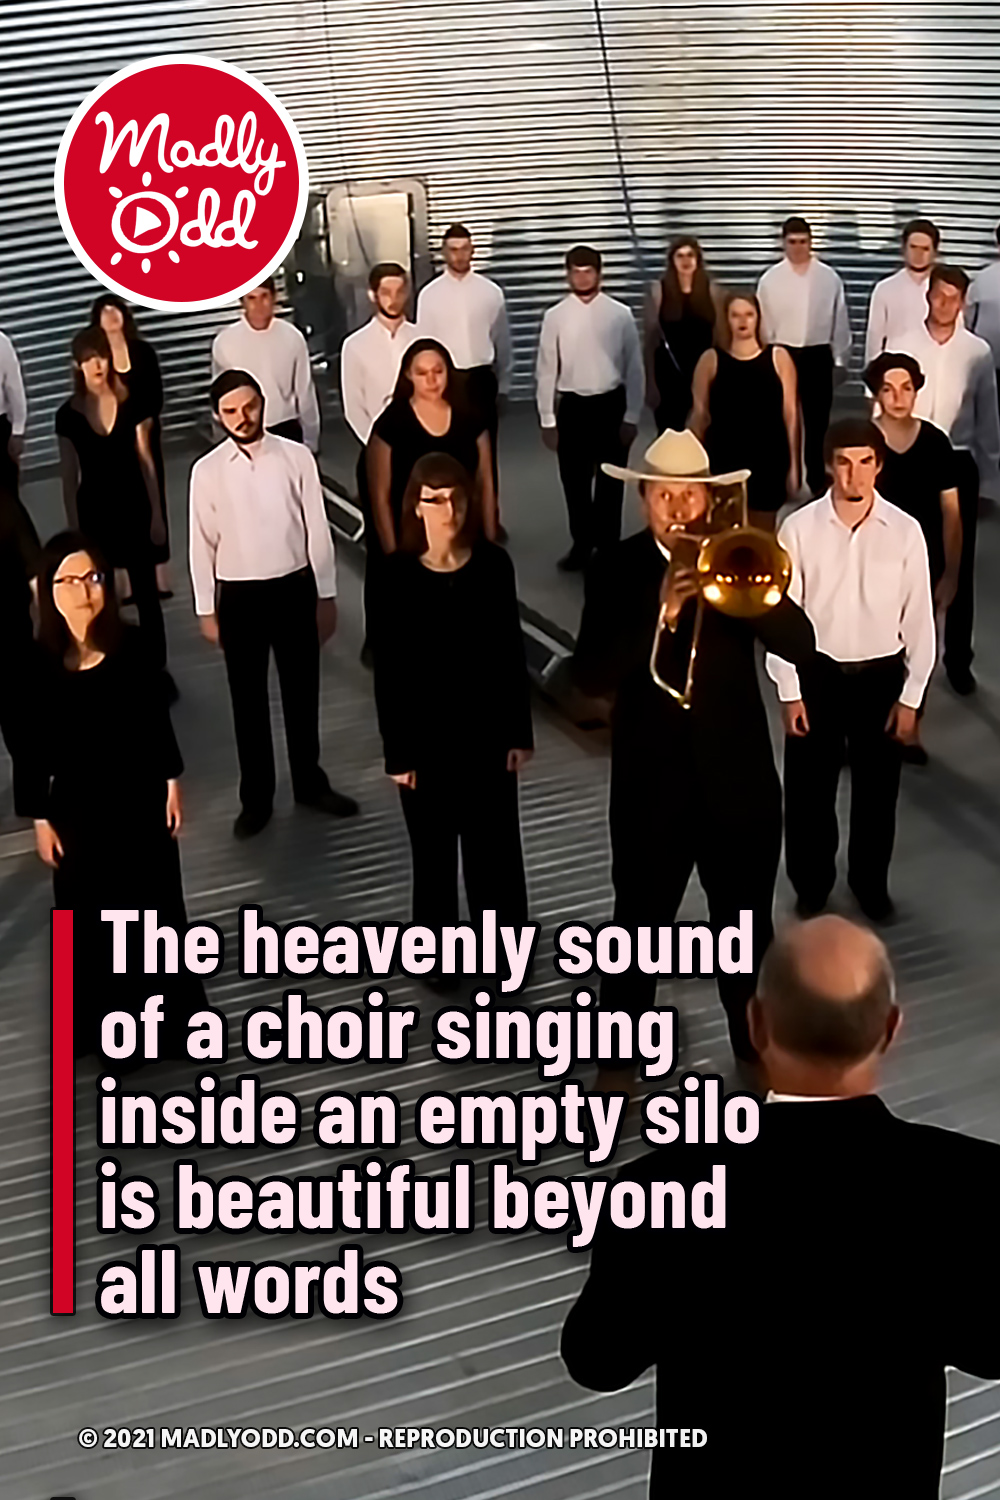 The heavenly sound of a choir singing inside an empty silo is beautiful beyond all words